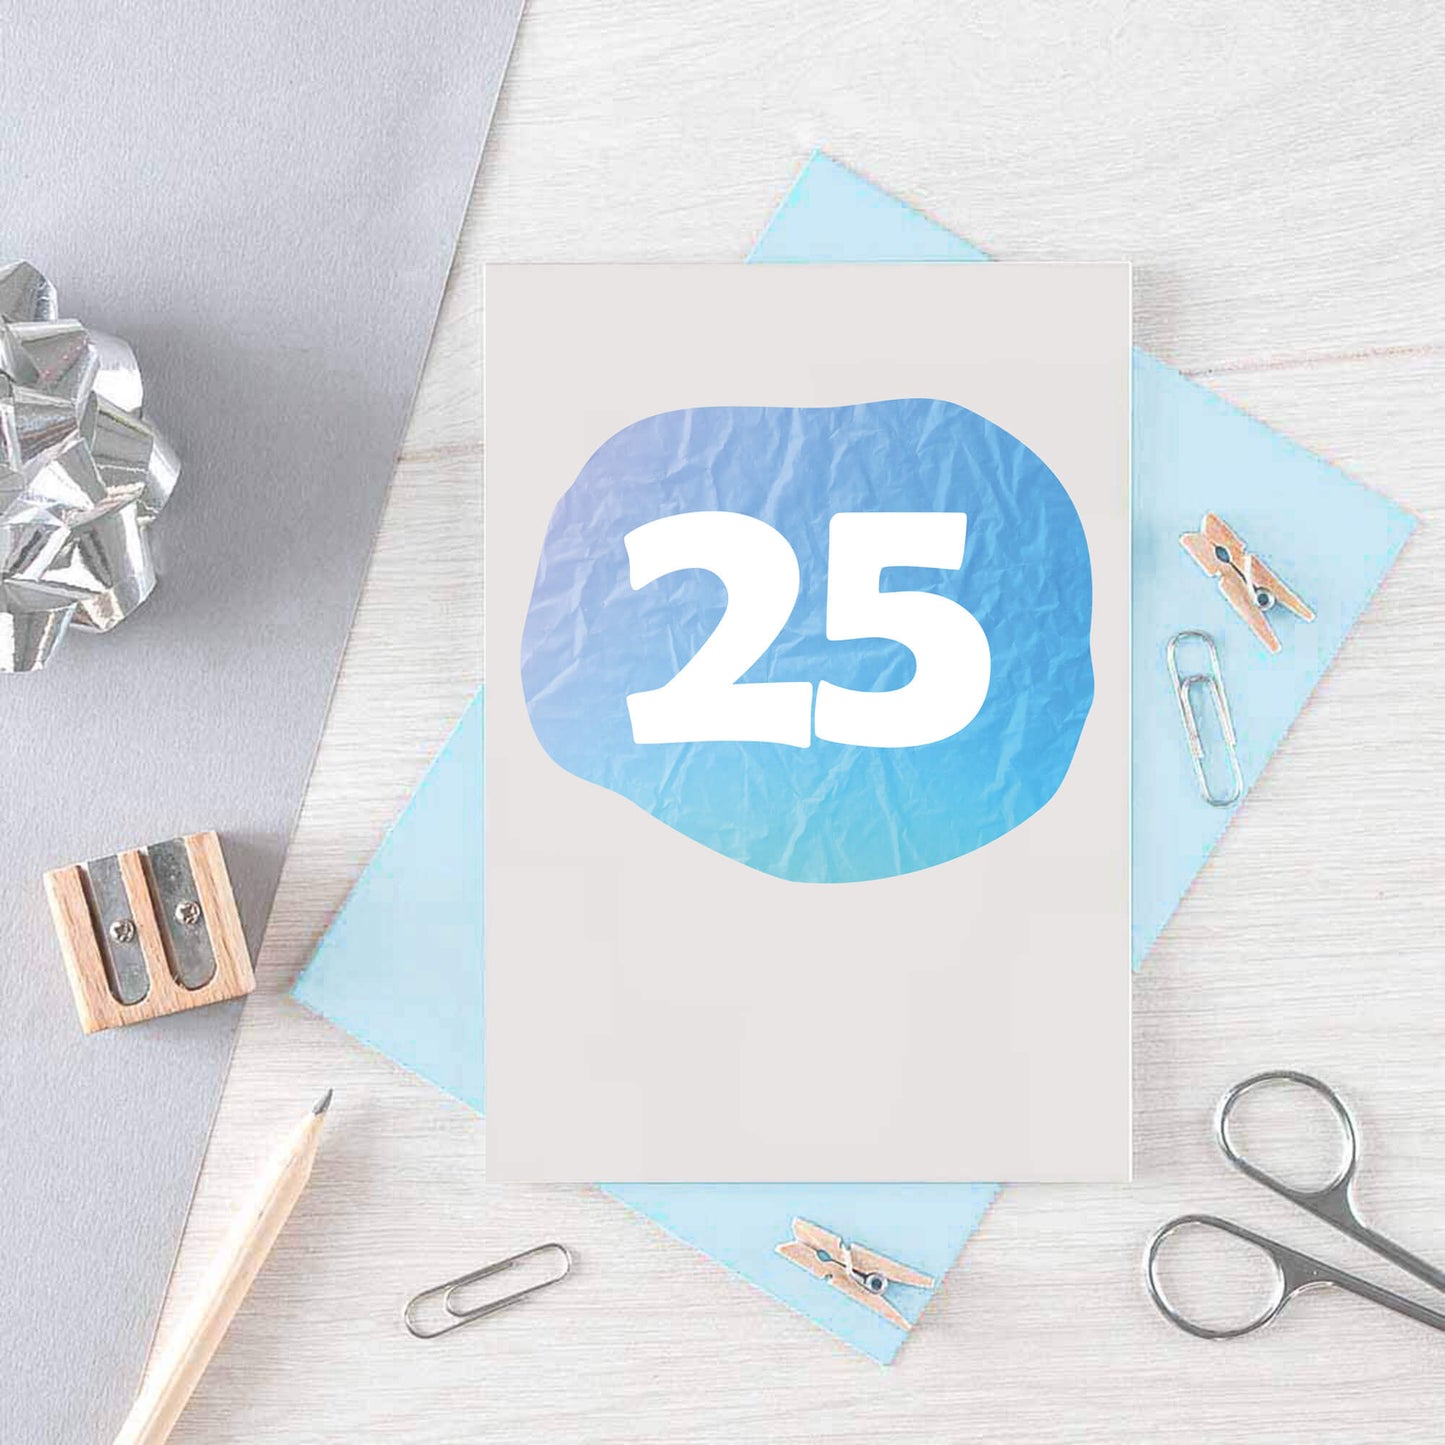 25 Years Card by SixElevenCreations. Product Code SE4064A6